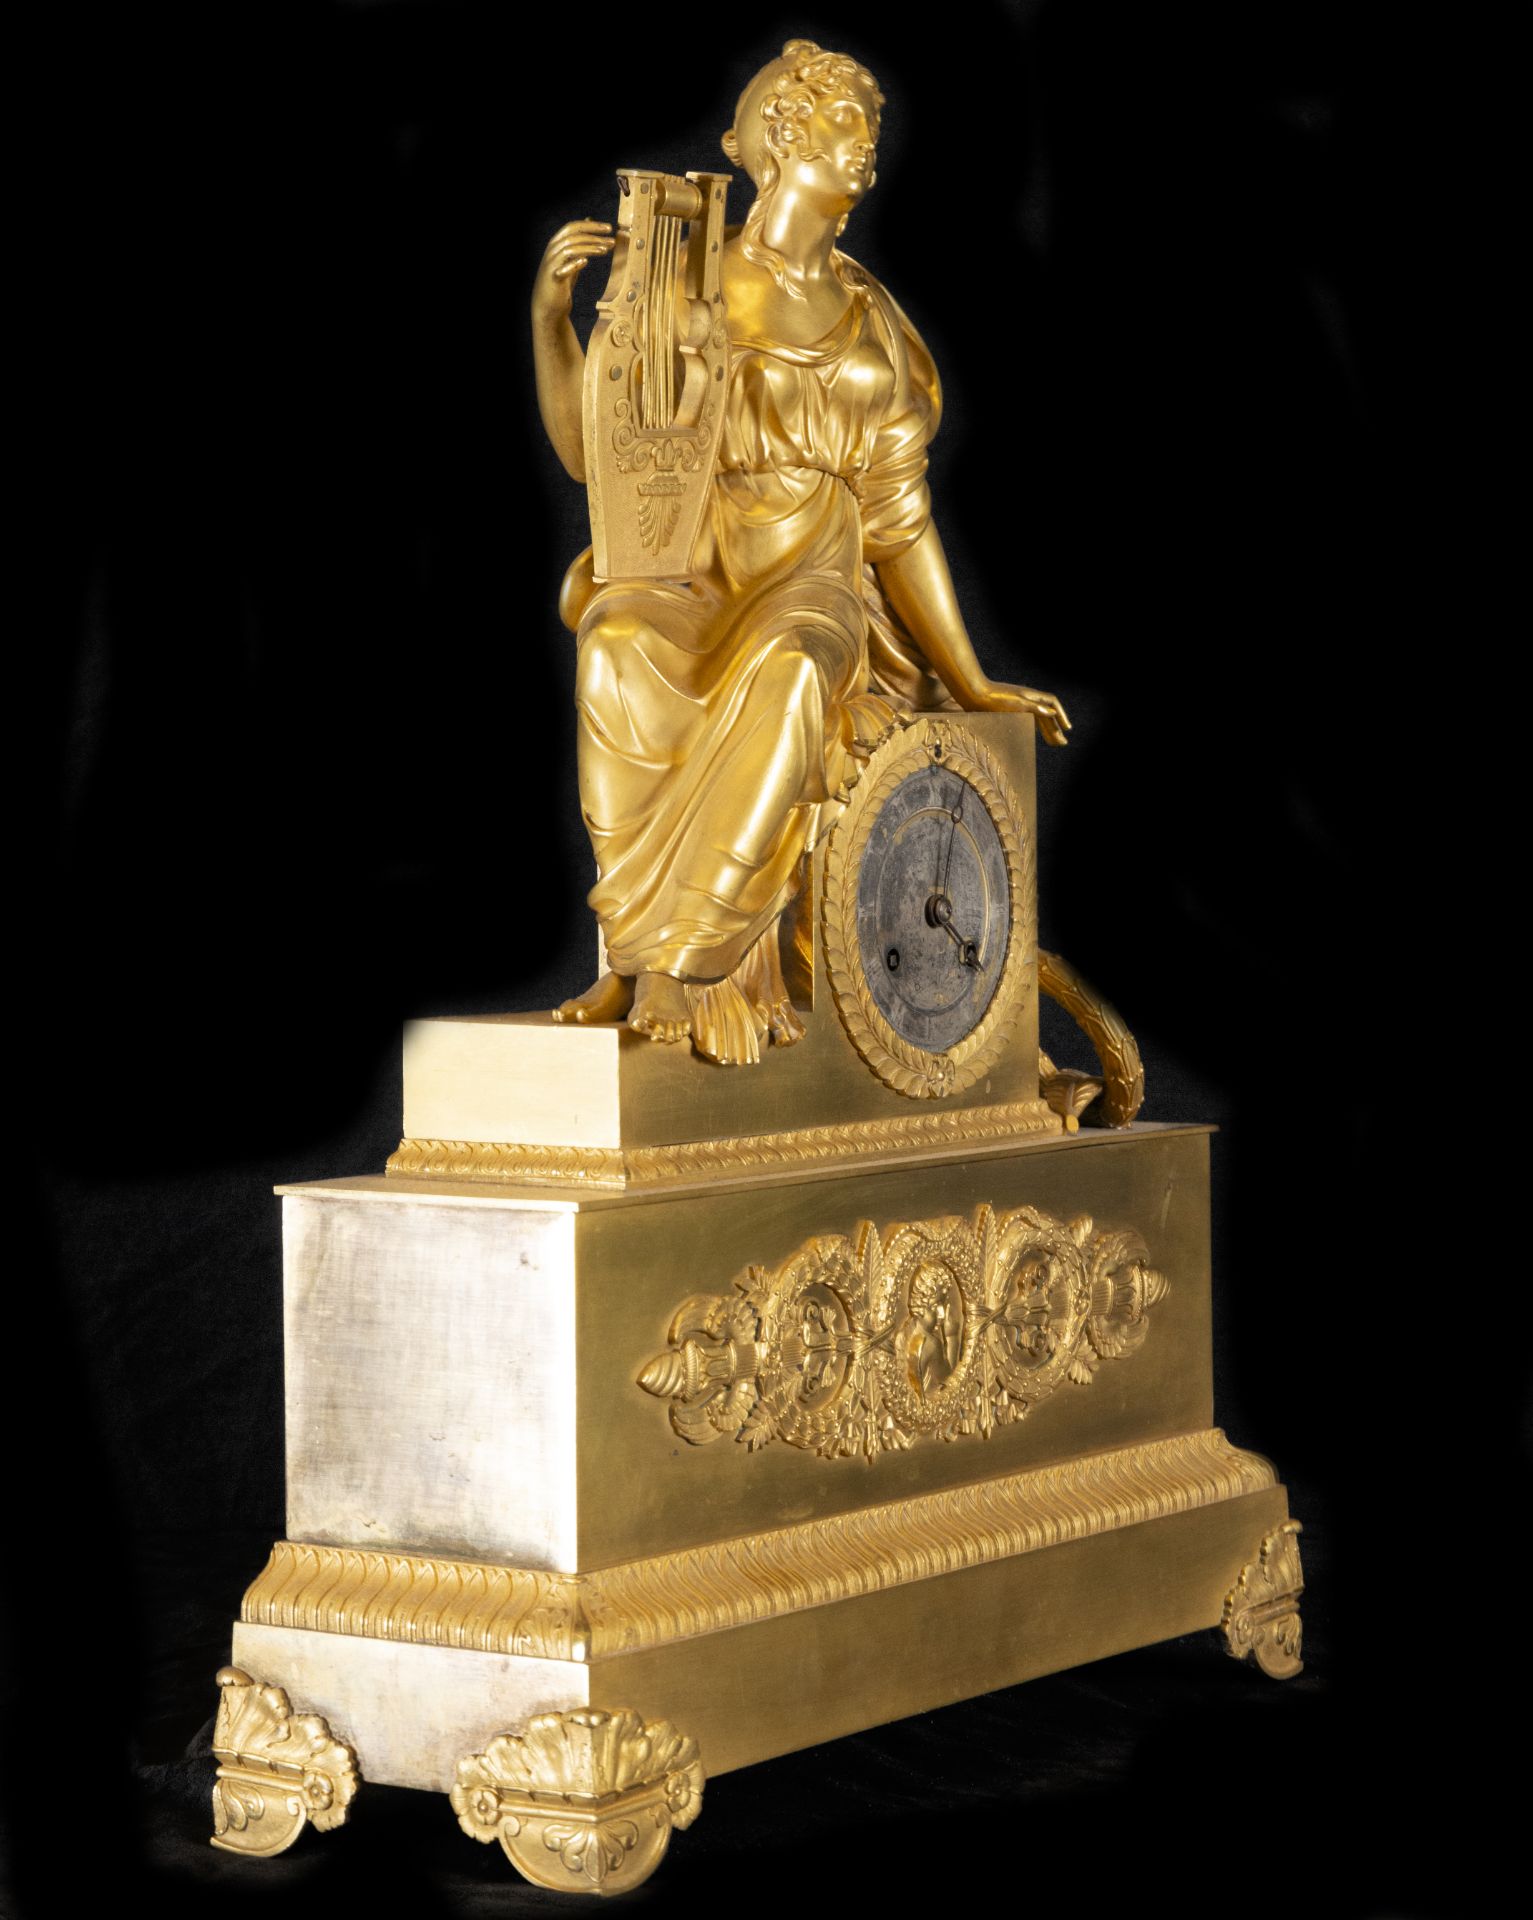 Important French Empire period table clock, early 19th century, in mercury gilt bronze - Image 4 of 6